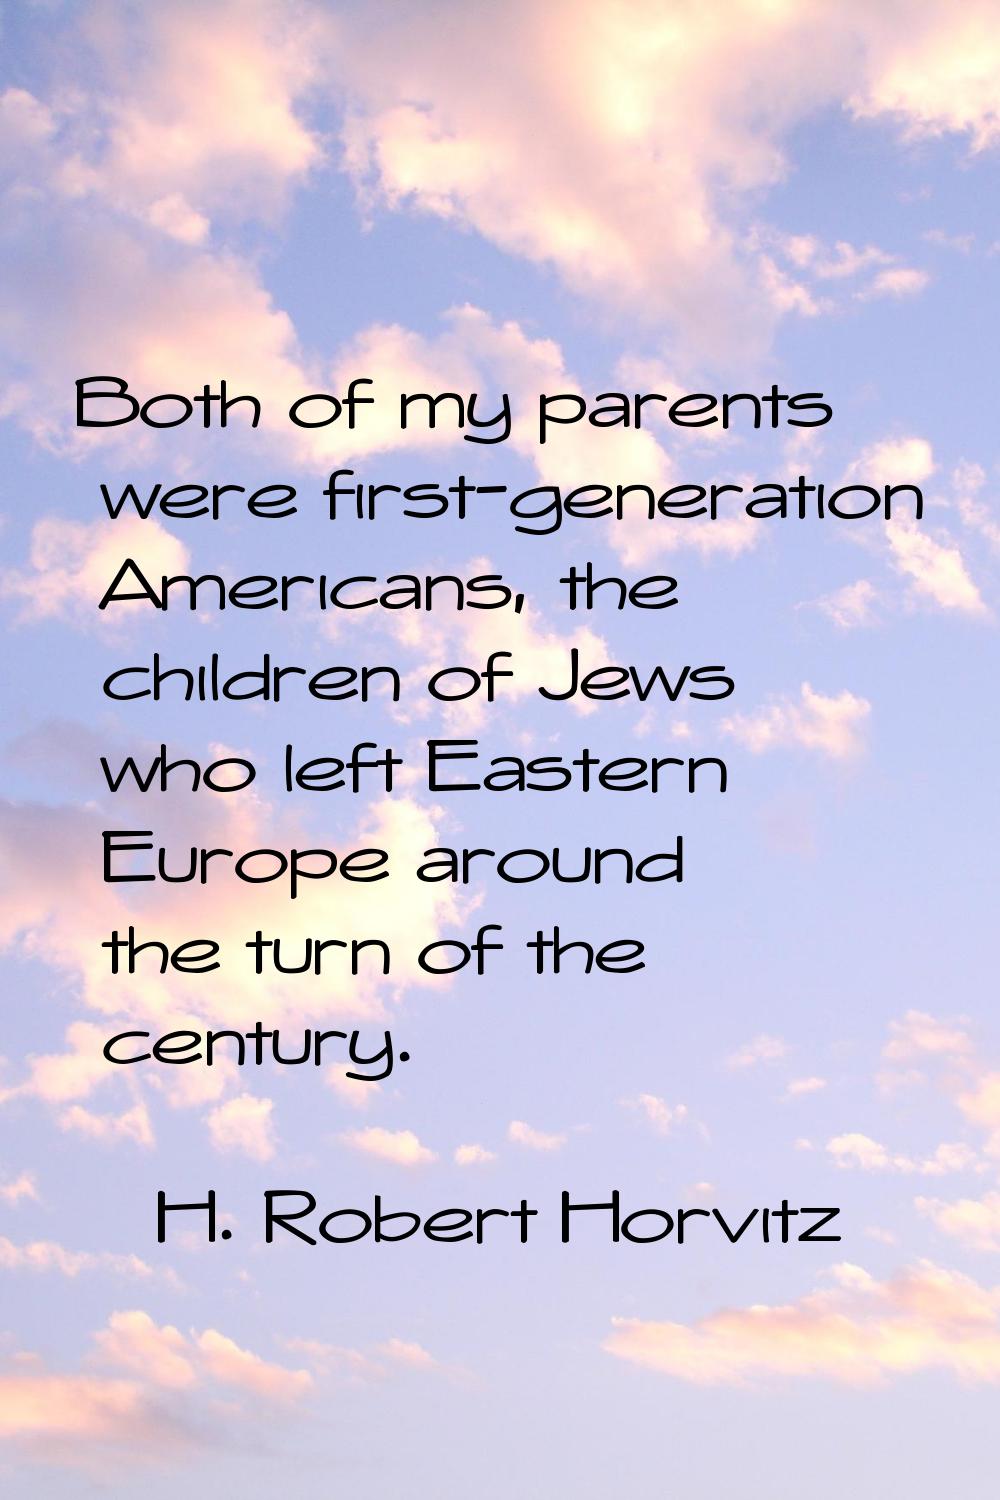 Both of my parents were first-generation Americans, the children of Jews who left Eastern Europe ar